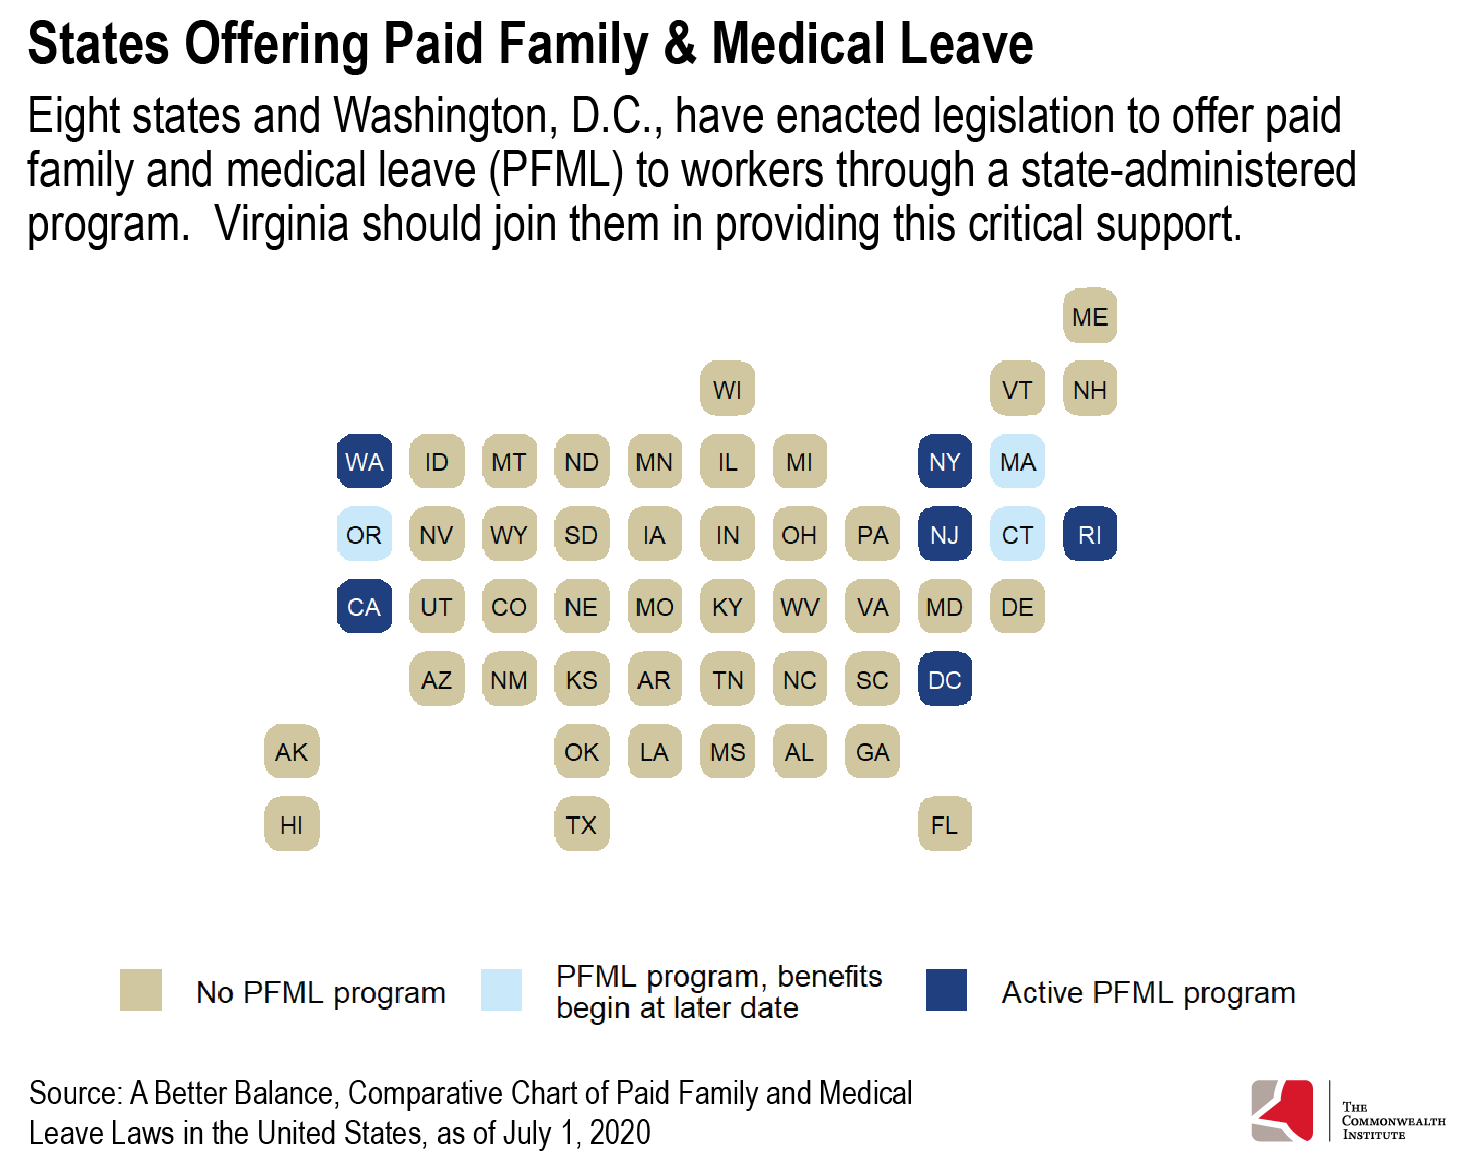 Map showing the states that have enacted legislation to provide paid family and medical leave through a state-administered program